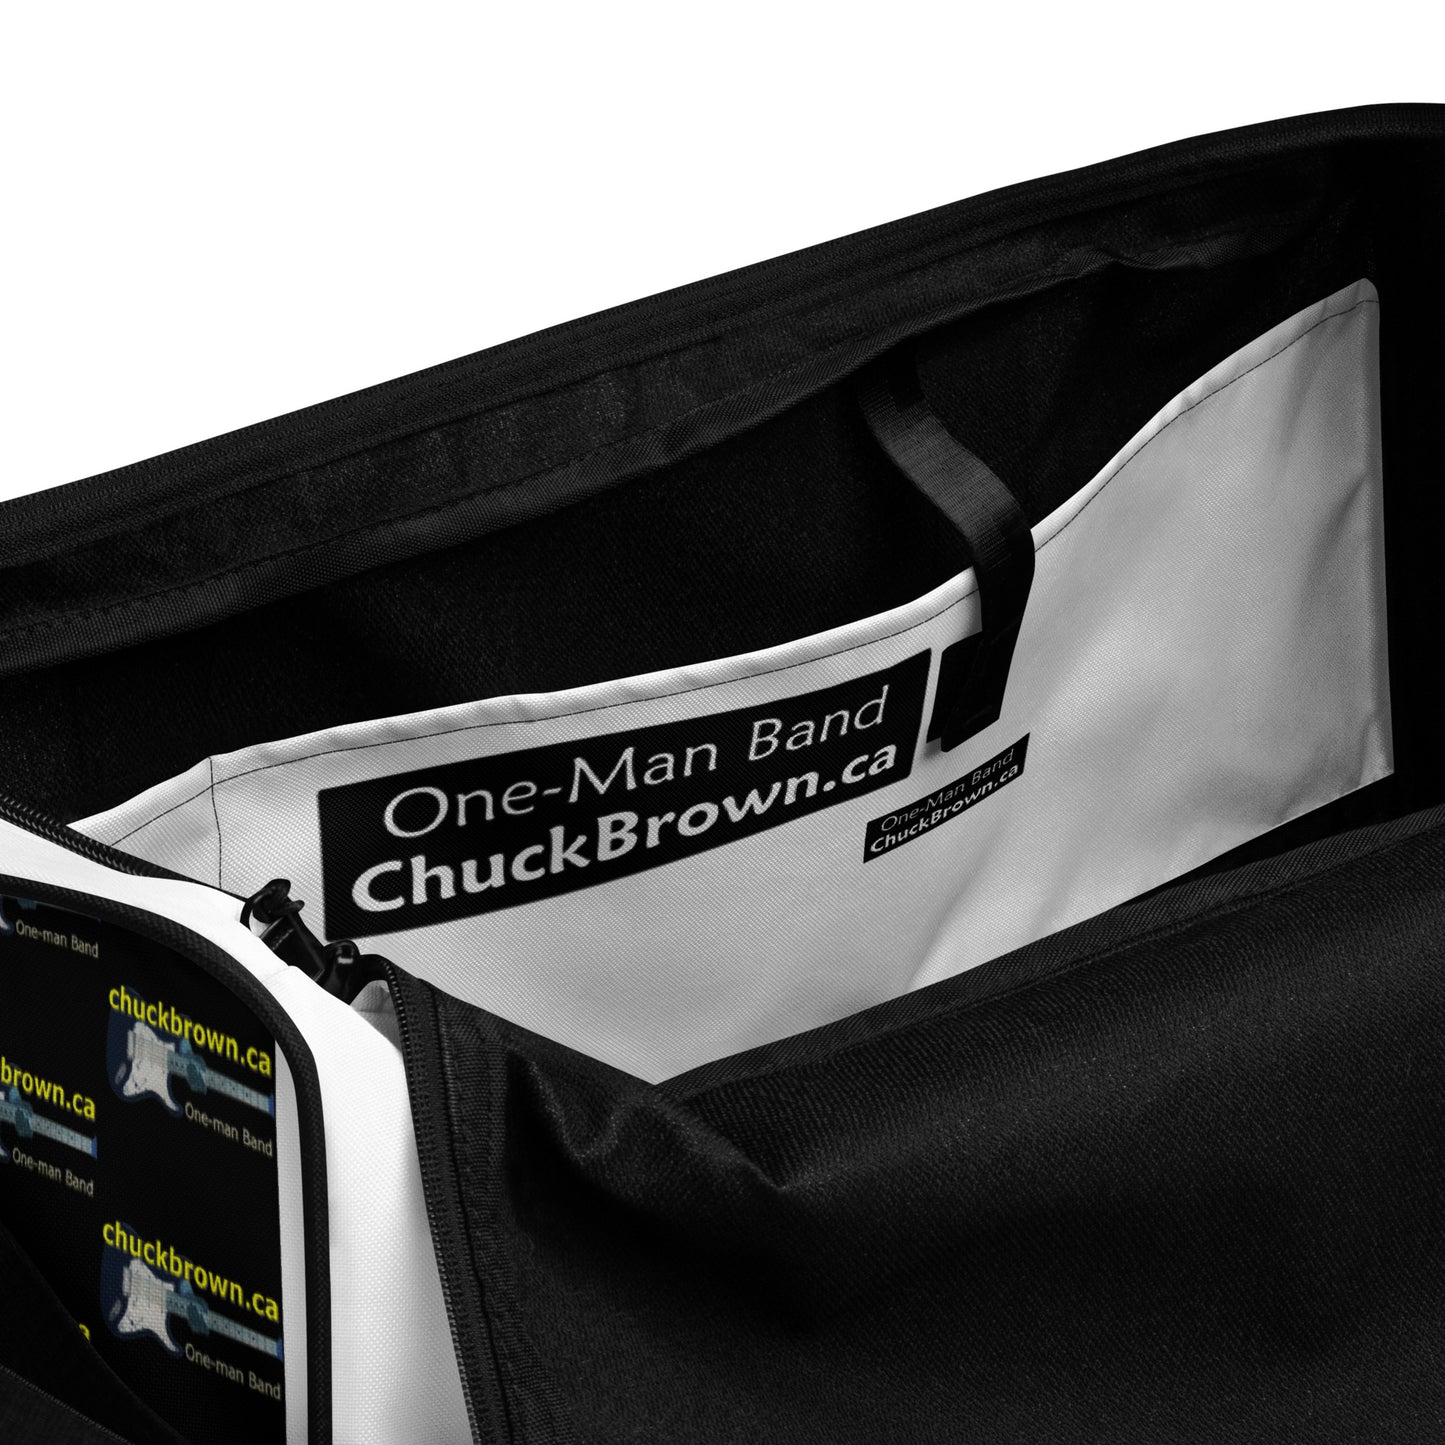 'CB' Duffle bag: "...ROOT CANAL" + Logos all around